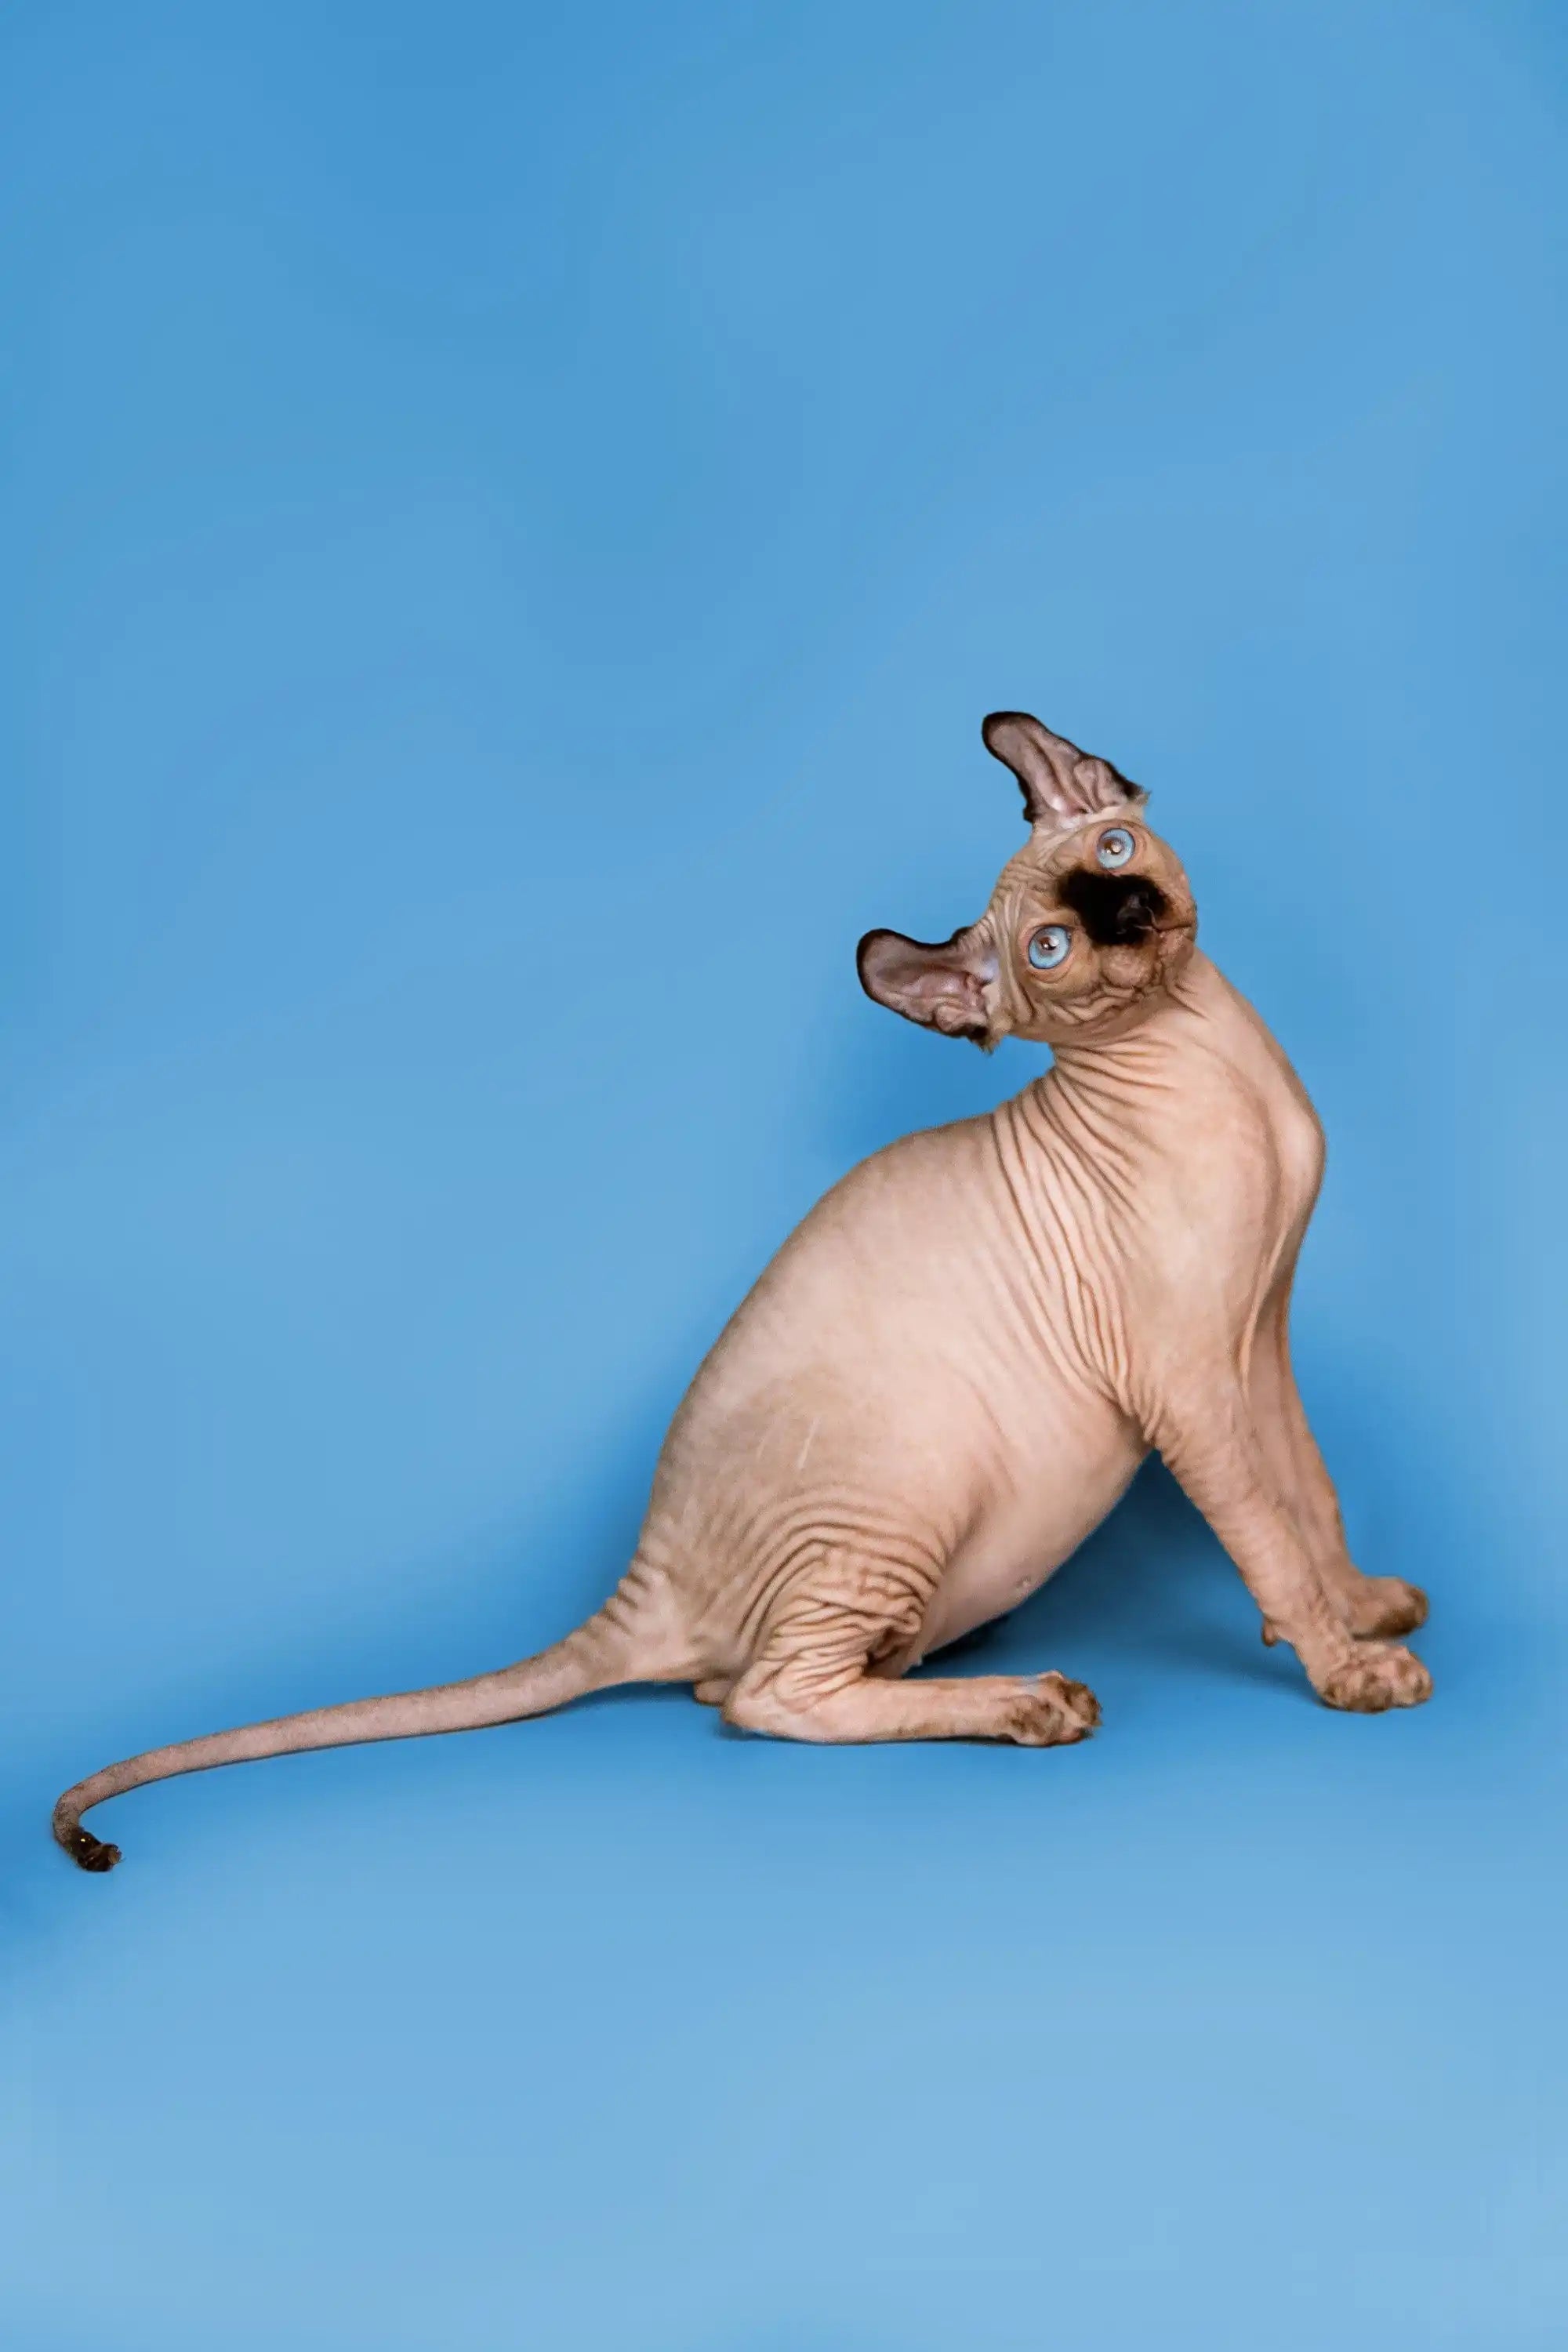 Sphynx Cats and Kittens for Sale Arnold | Elf Kitten